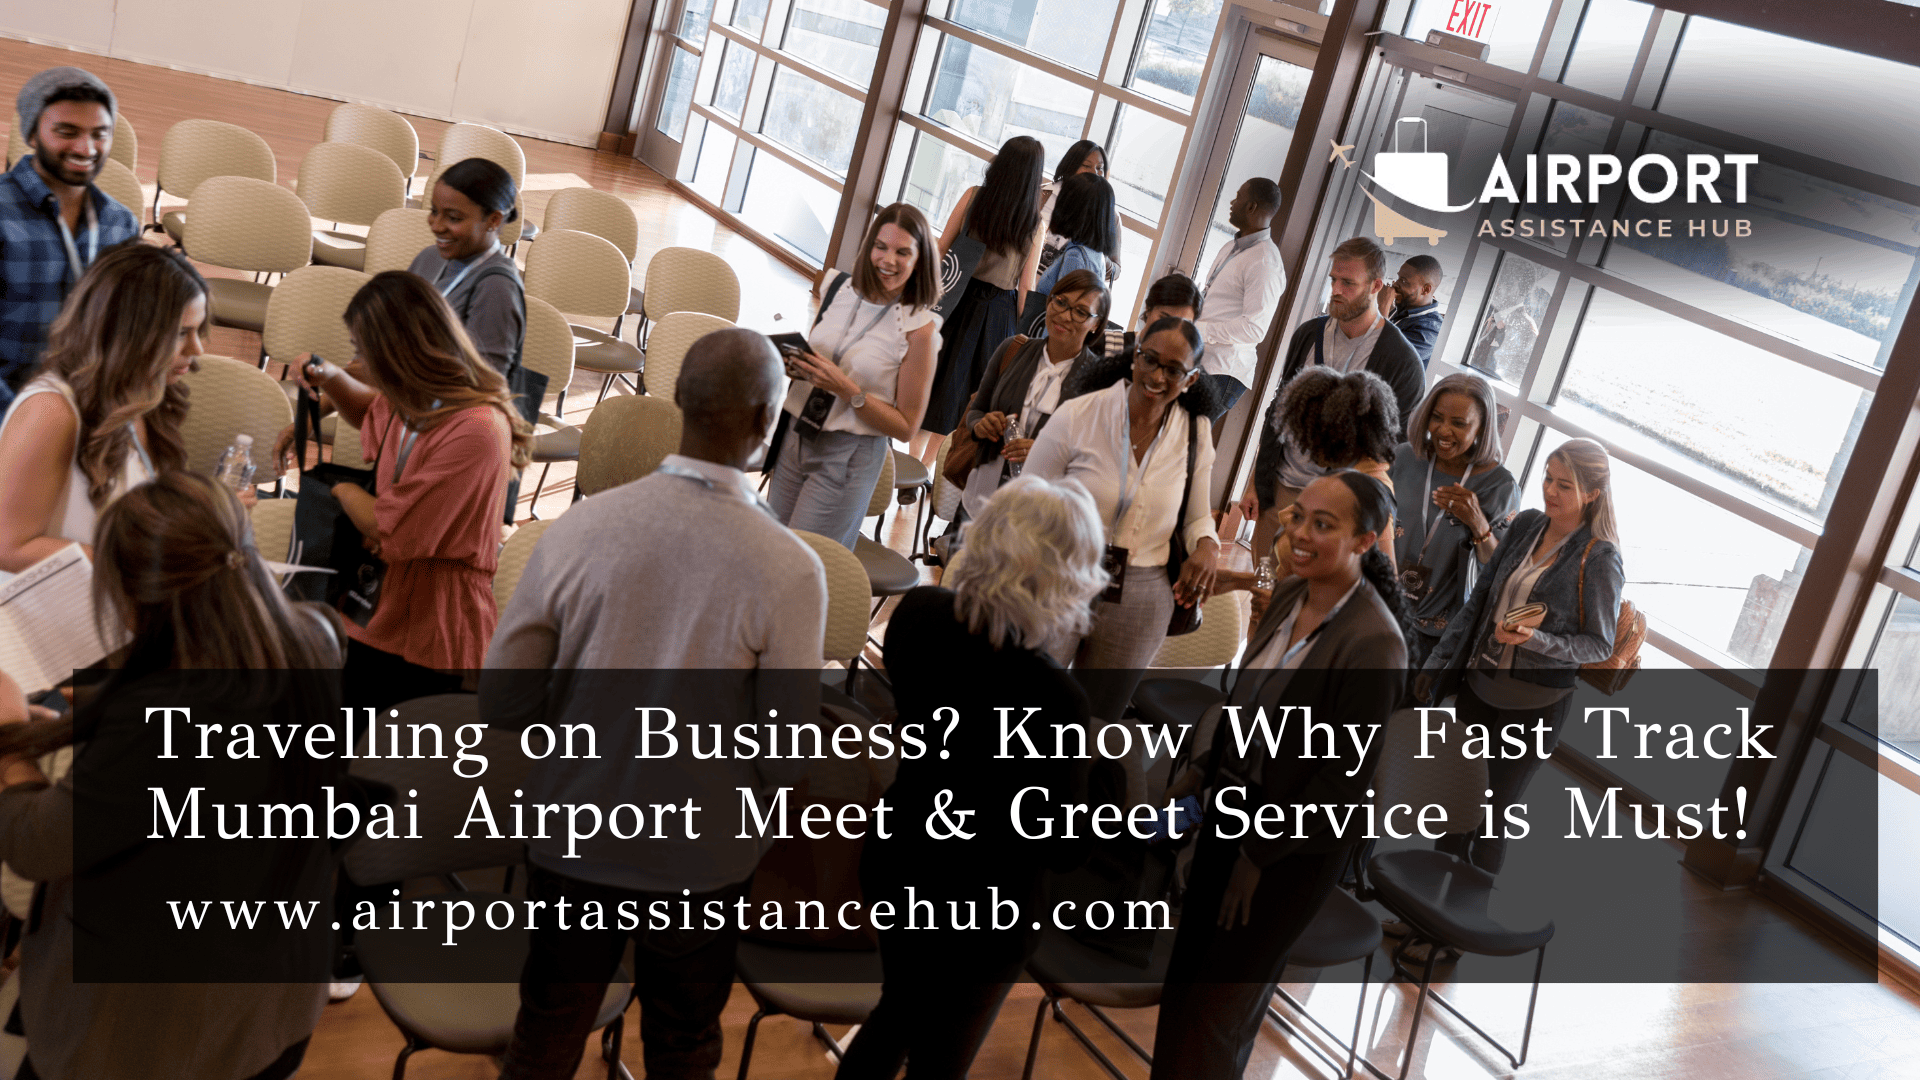 Travelling on Business? Know Why Fast Track Mumbai Airport Meet & Greet Service is Must!